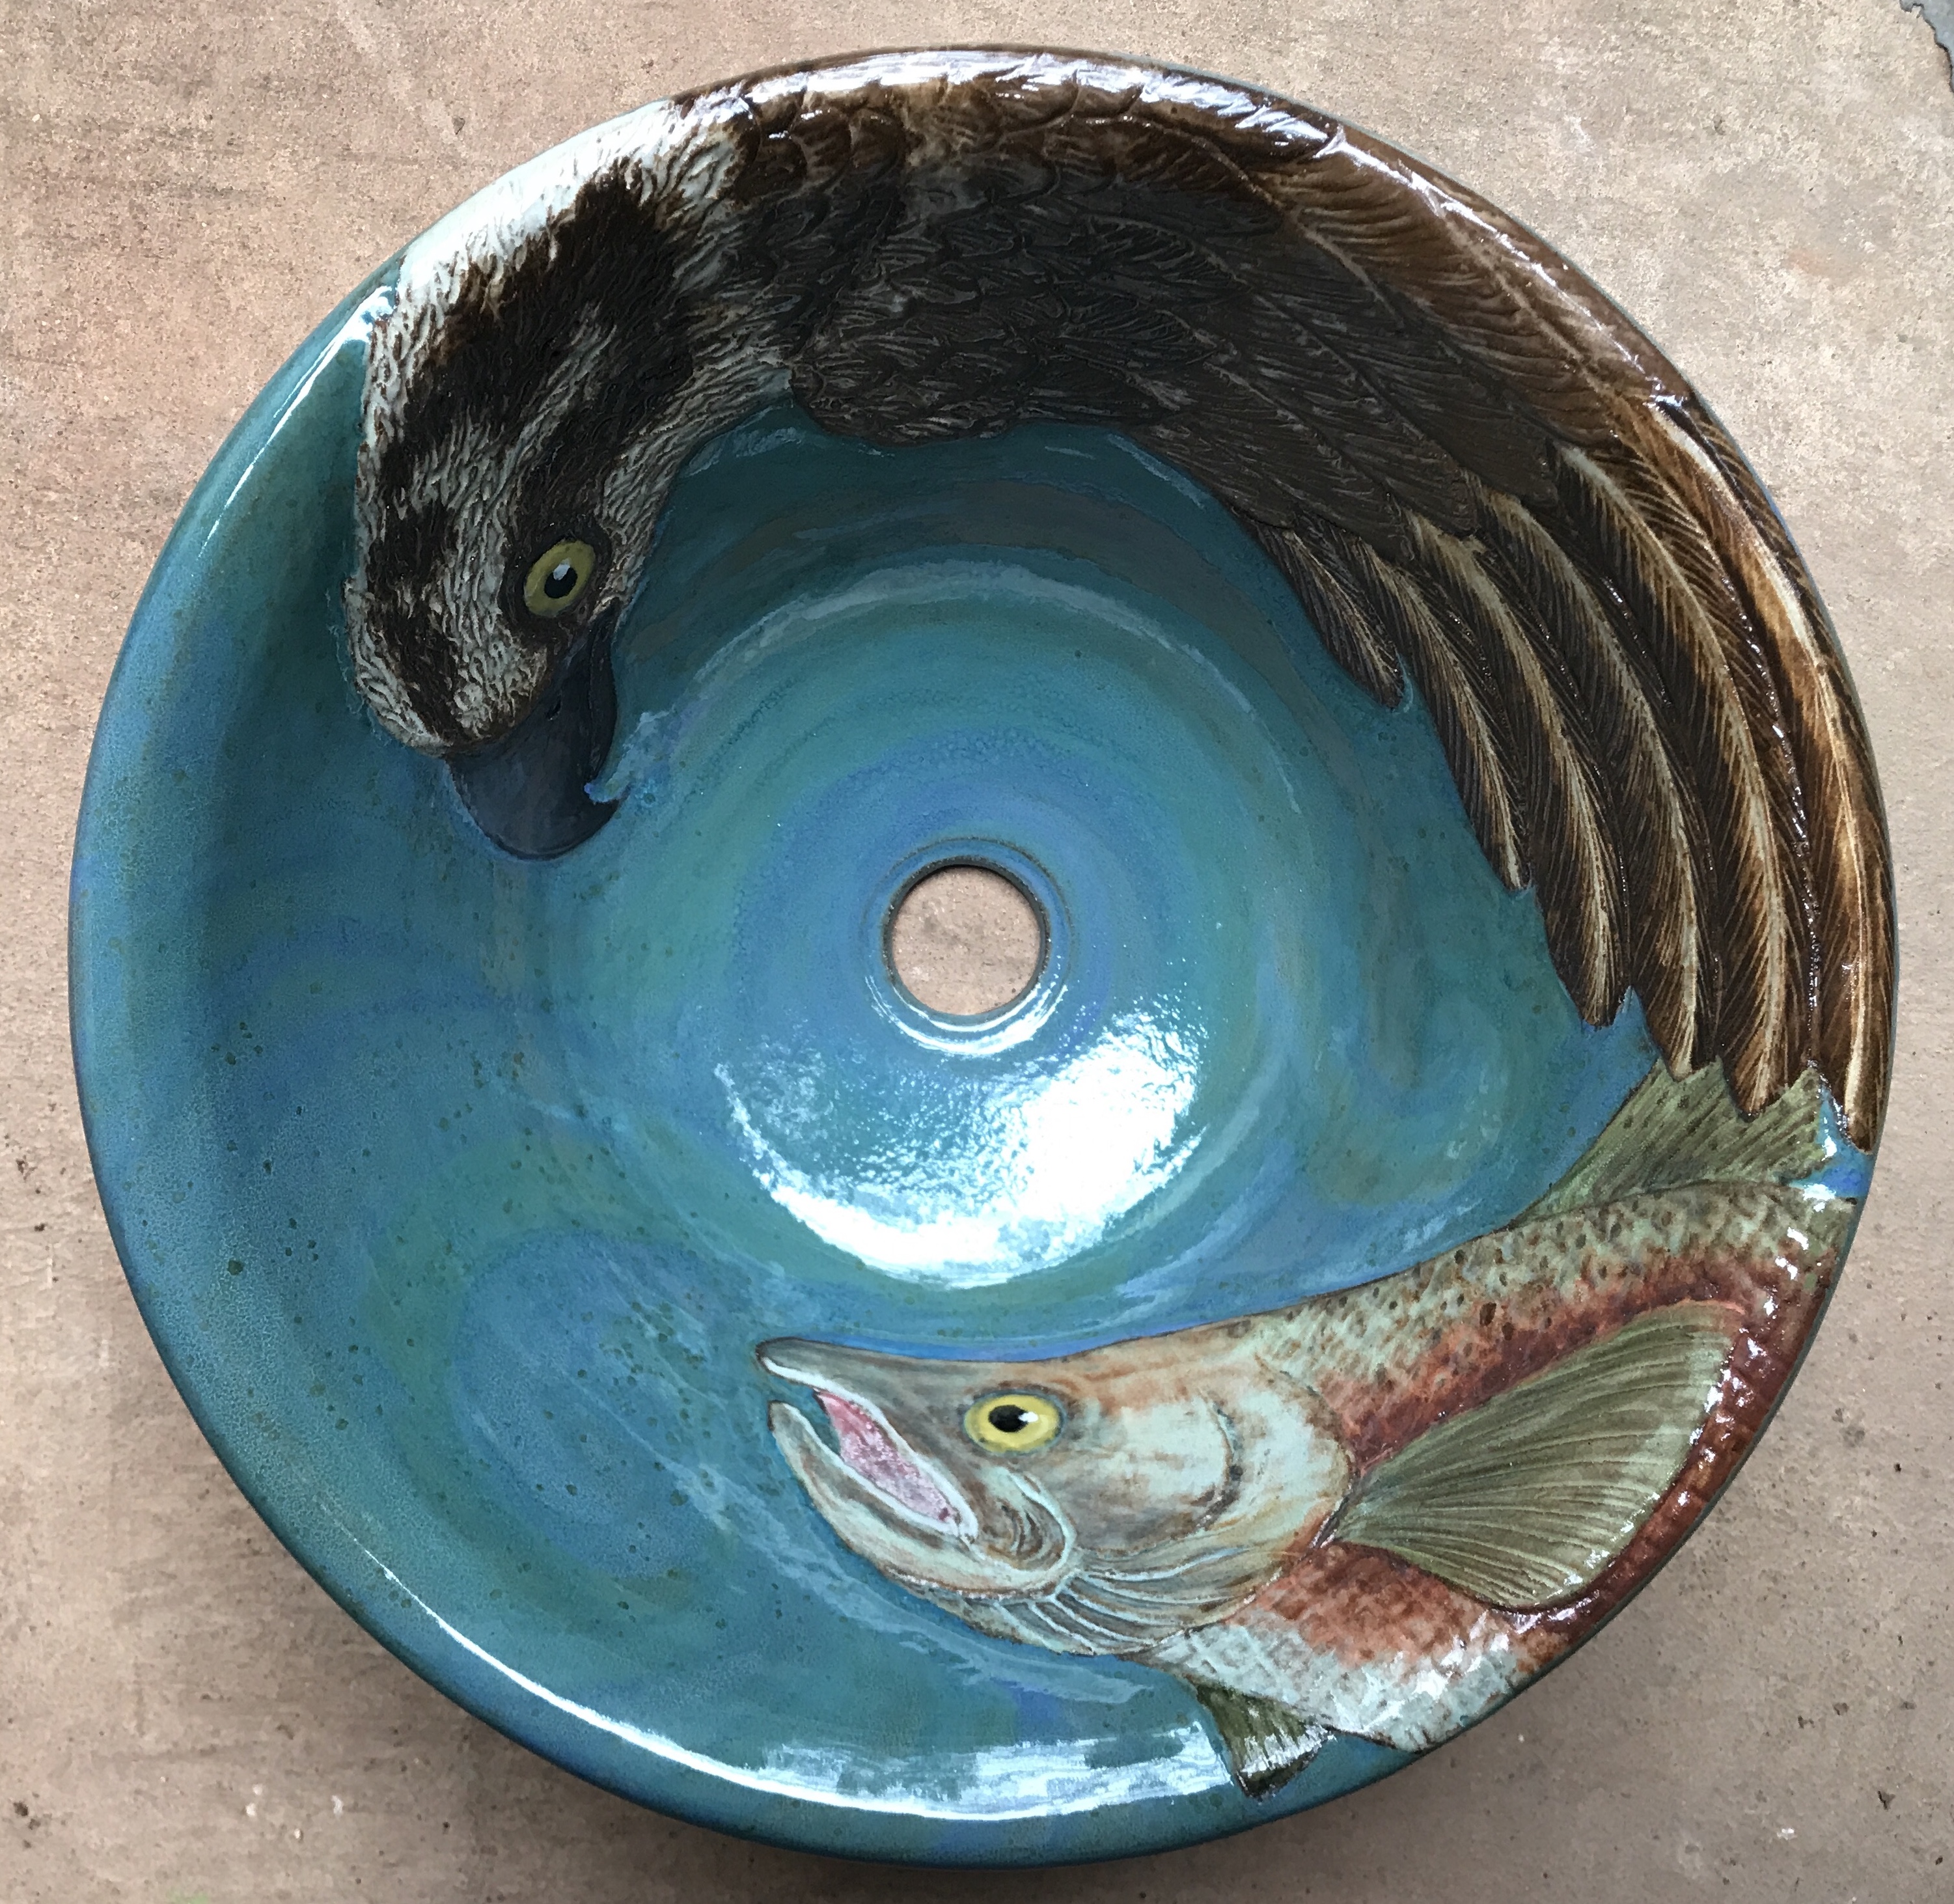 Carved Ceramic Sink with Salmon and Osprey Design